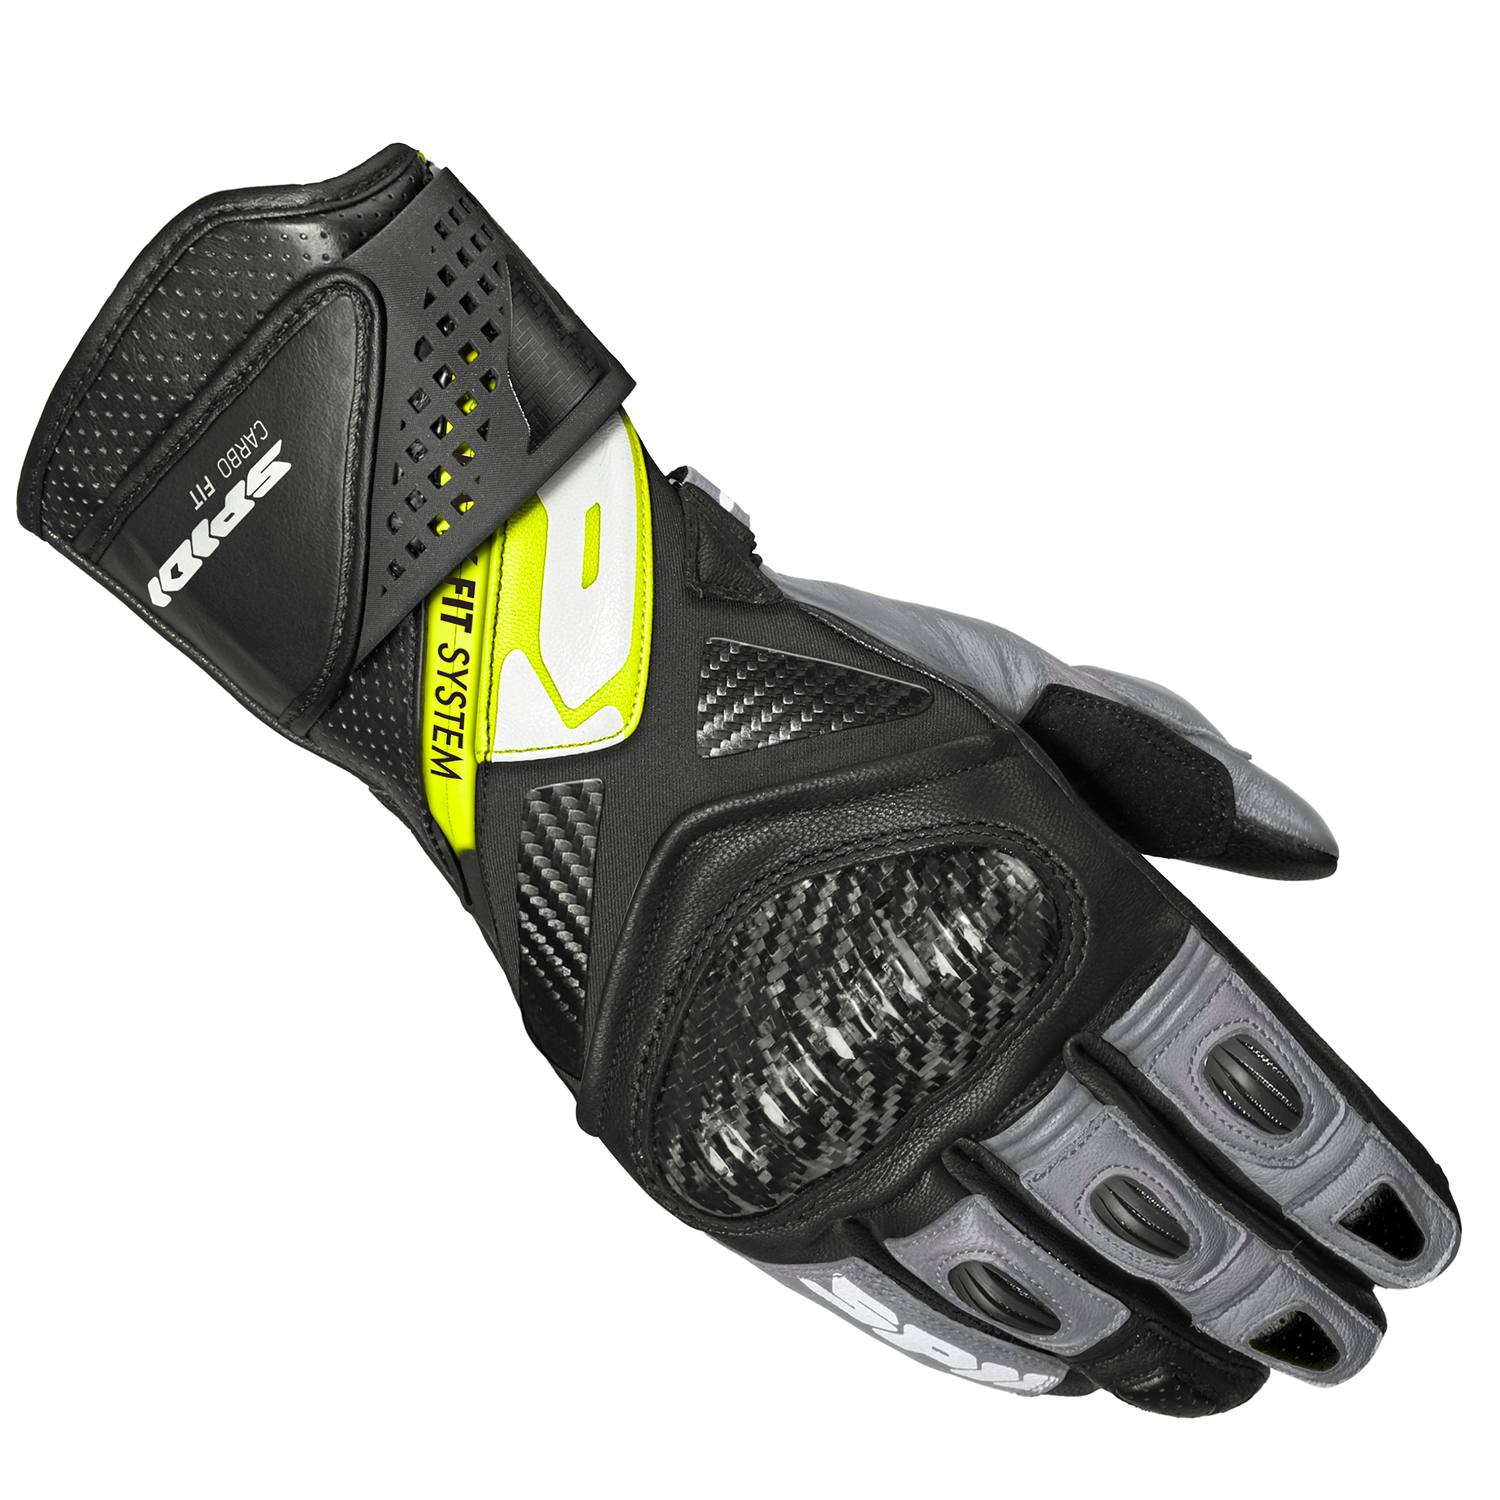 Image of EU Spidi Carbo Fit Gloves Black Fluorescente Yellow Taille M